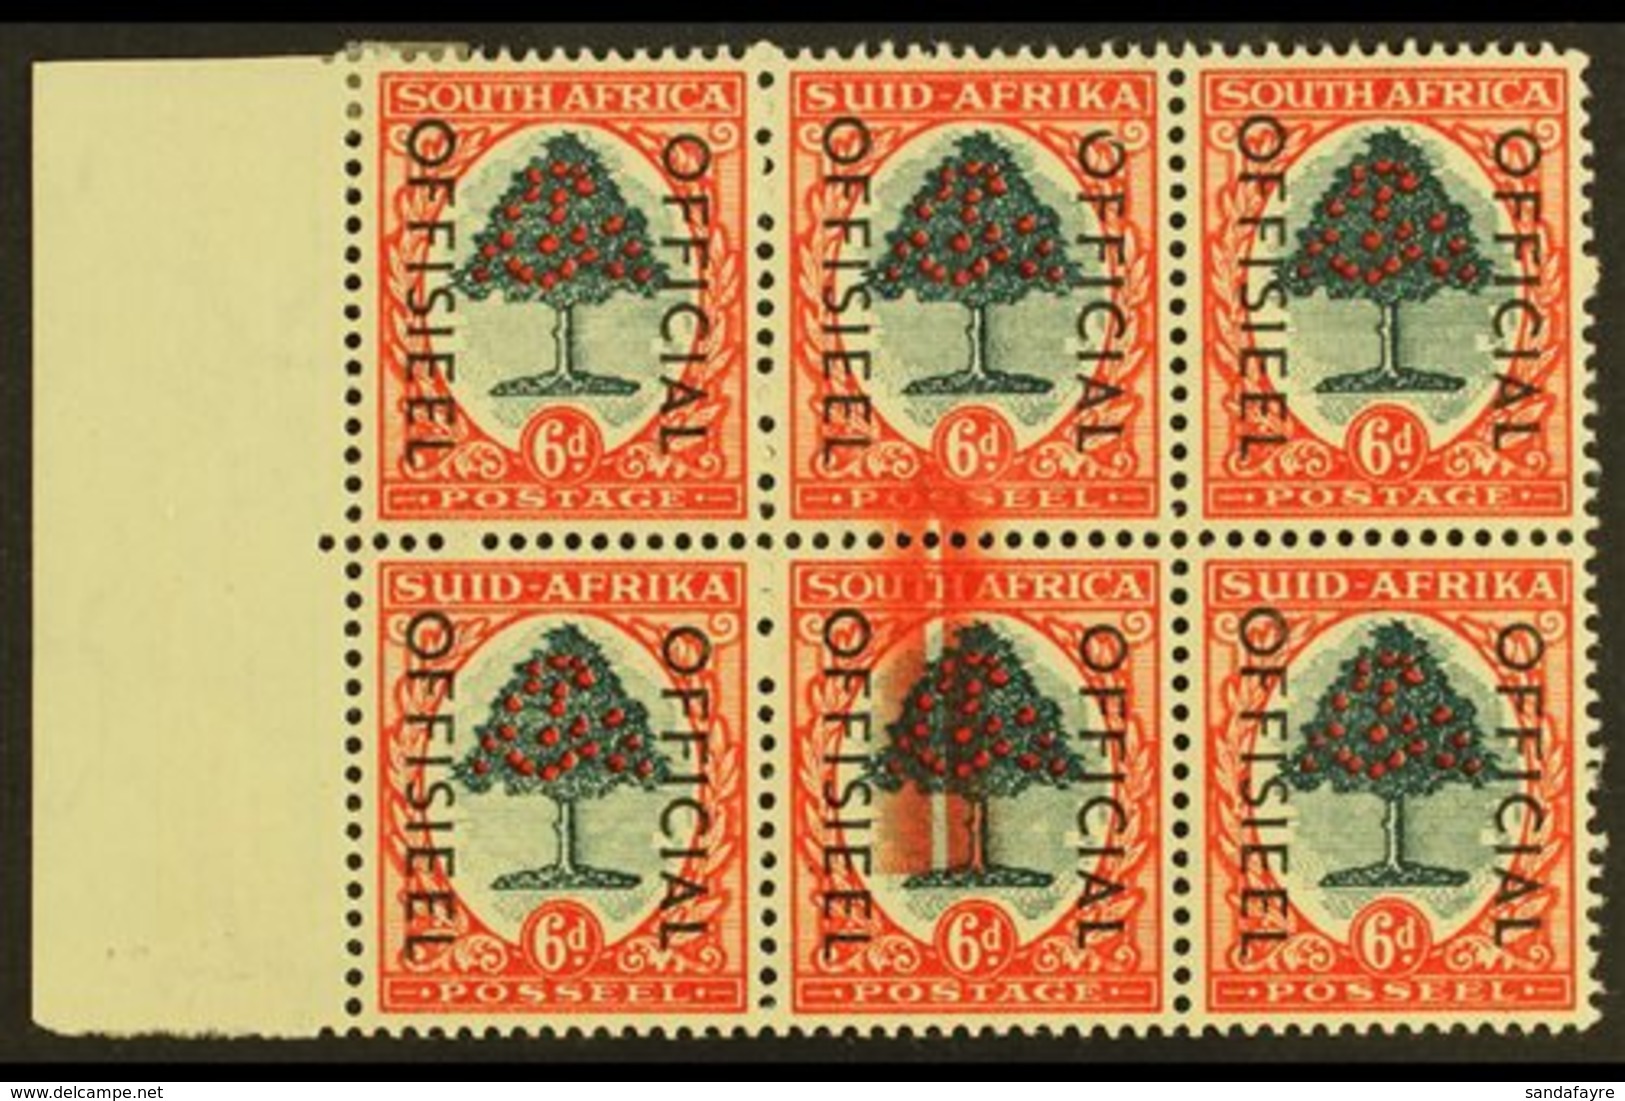 OFFICIAL VARIETY  1950-4 6d Green & Red-orange, Block Of Six With LARGE SCREEN FLAW, O46 Var, Very Fine Mint. For More I - Unclassified